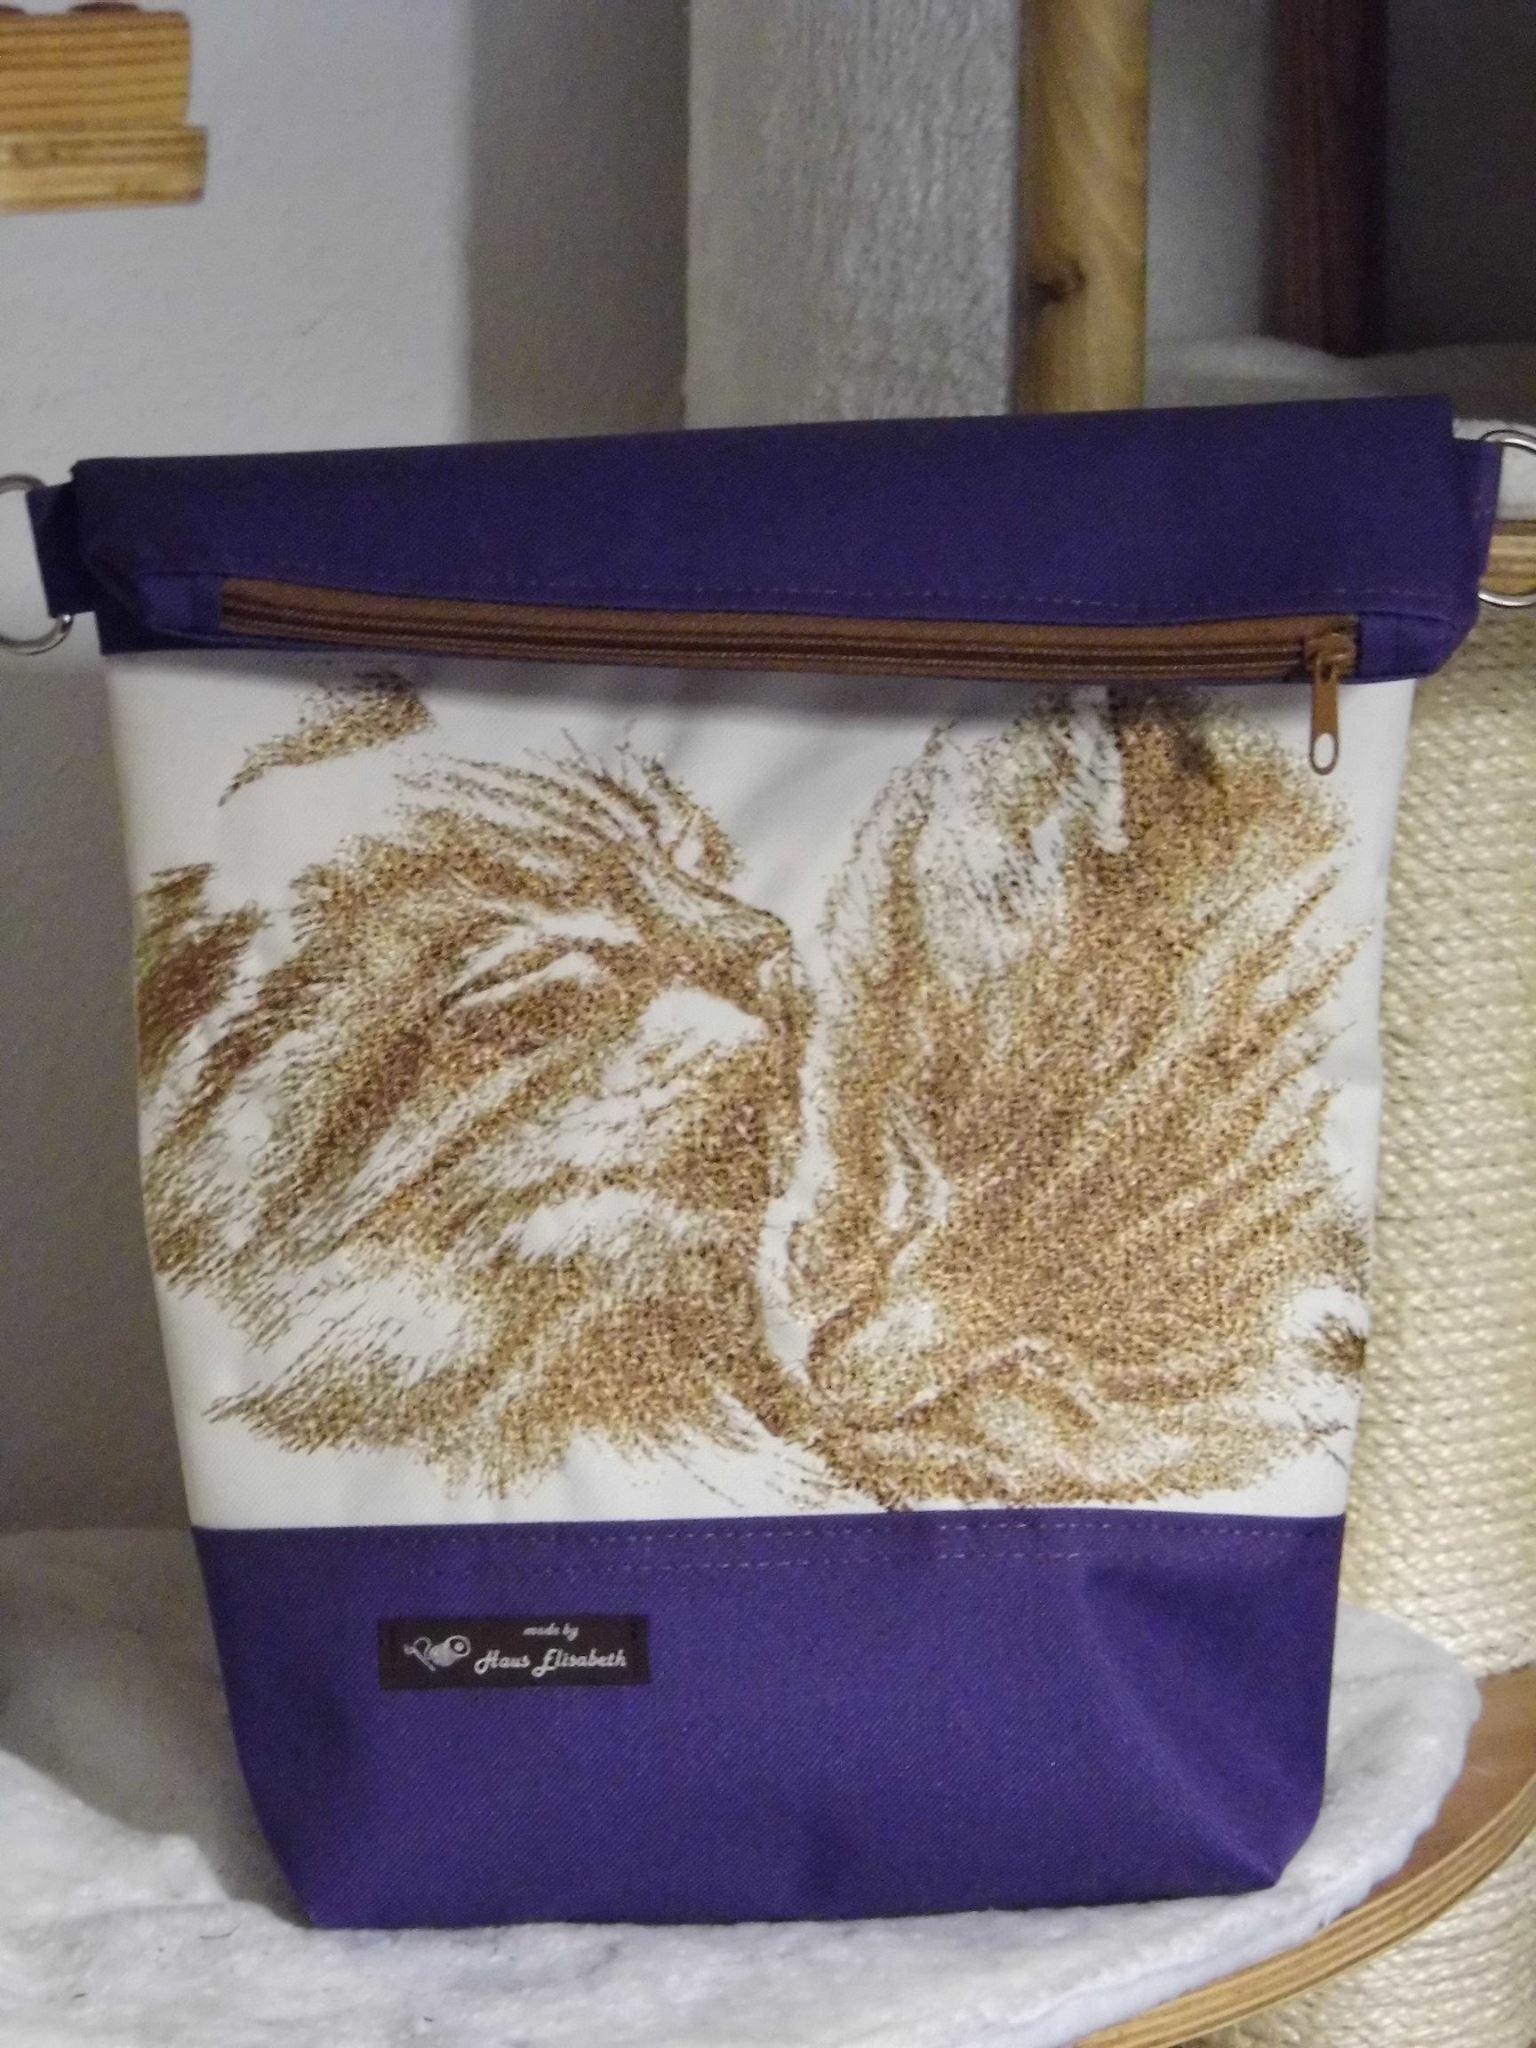 Embroidered bag with two cats design